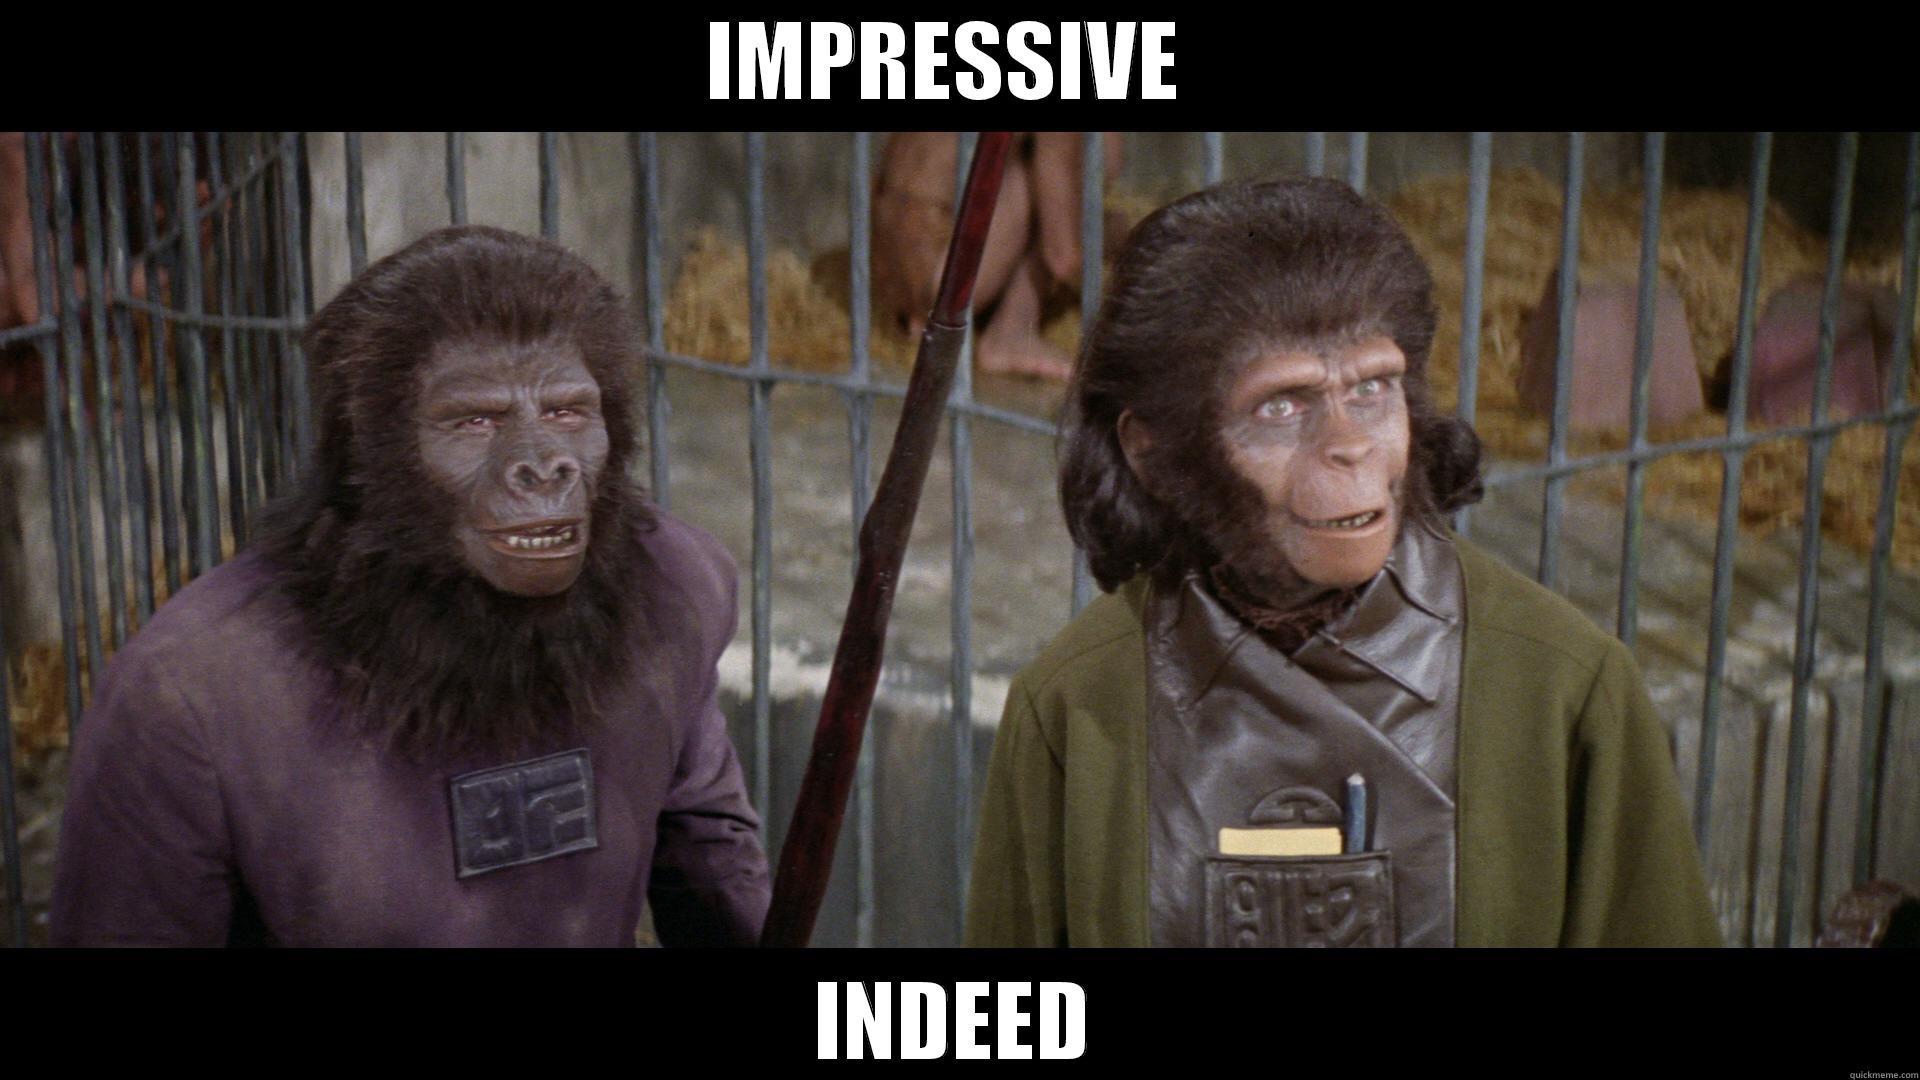 planet of the apes - IMPRESSIVE  INDEED Misc